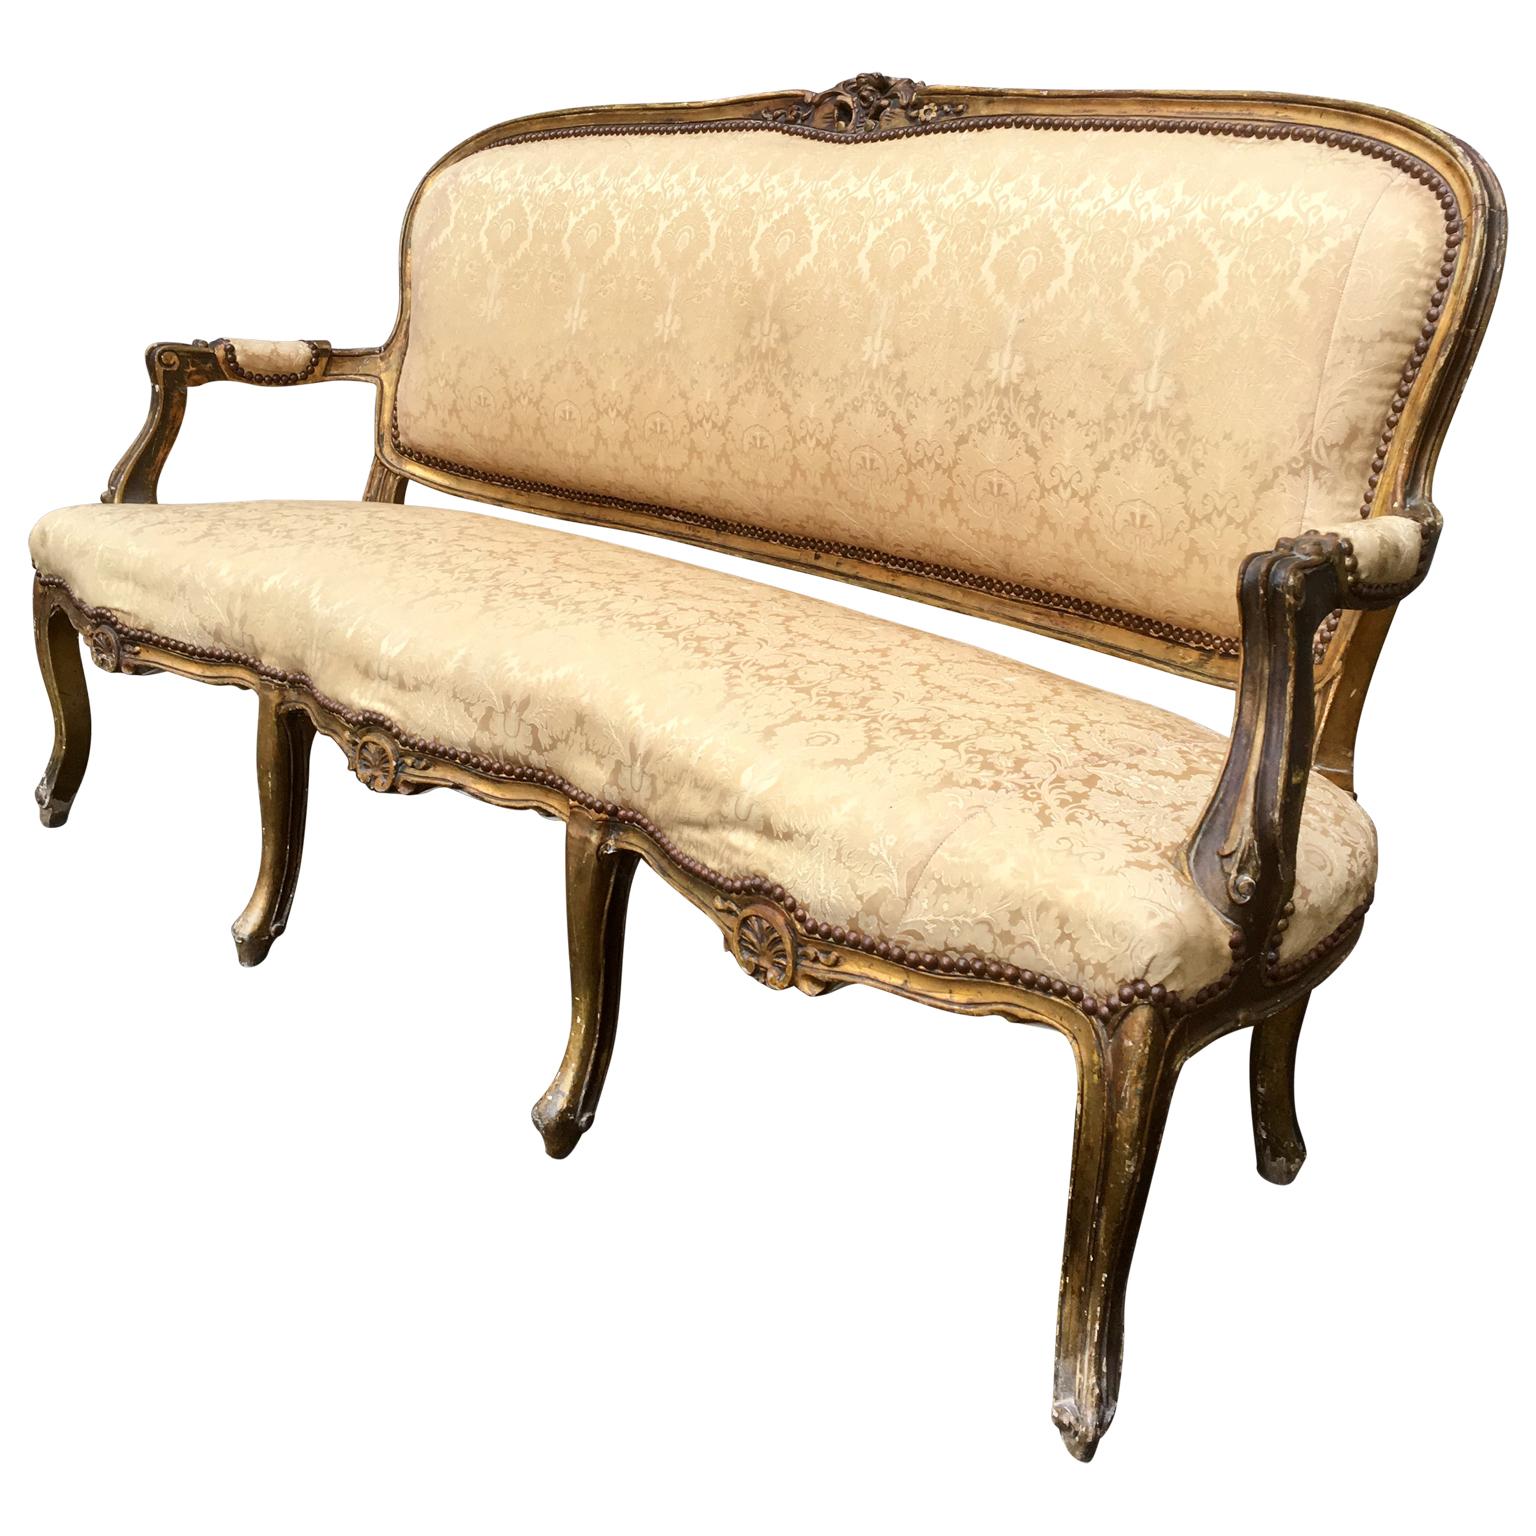 A gilt Napoleon III French sofa or bench from the end of the 19th century. Well carved and with an aged appropriate untouched original patina that gives you the feeling of being back in the 3rd French Empire lifestyle.